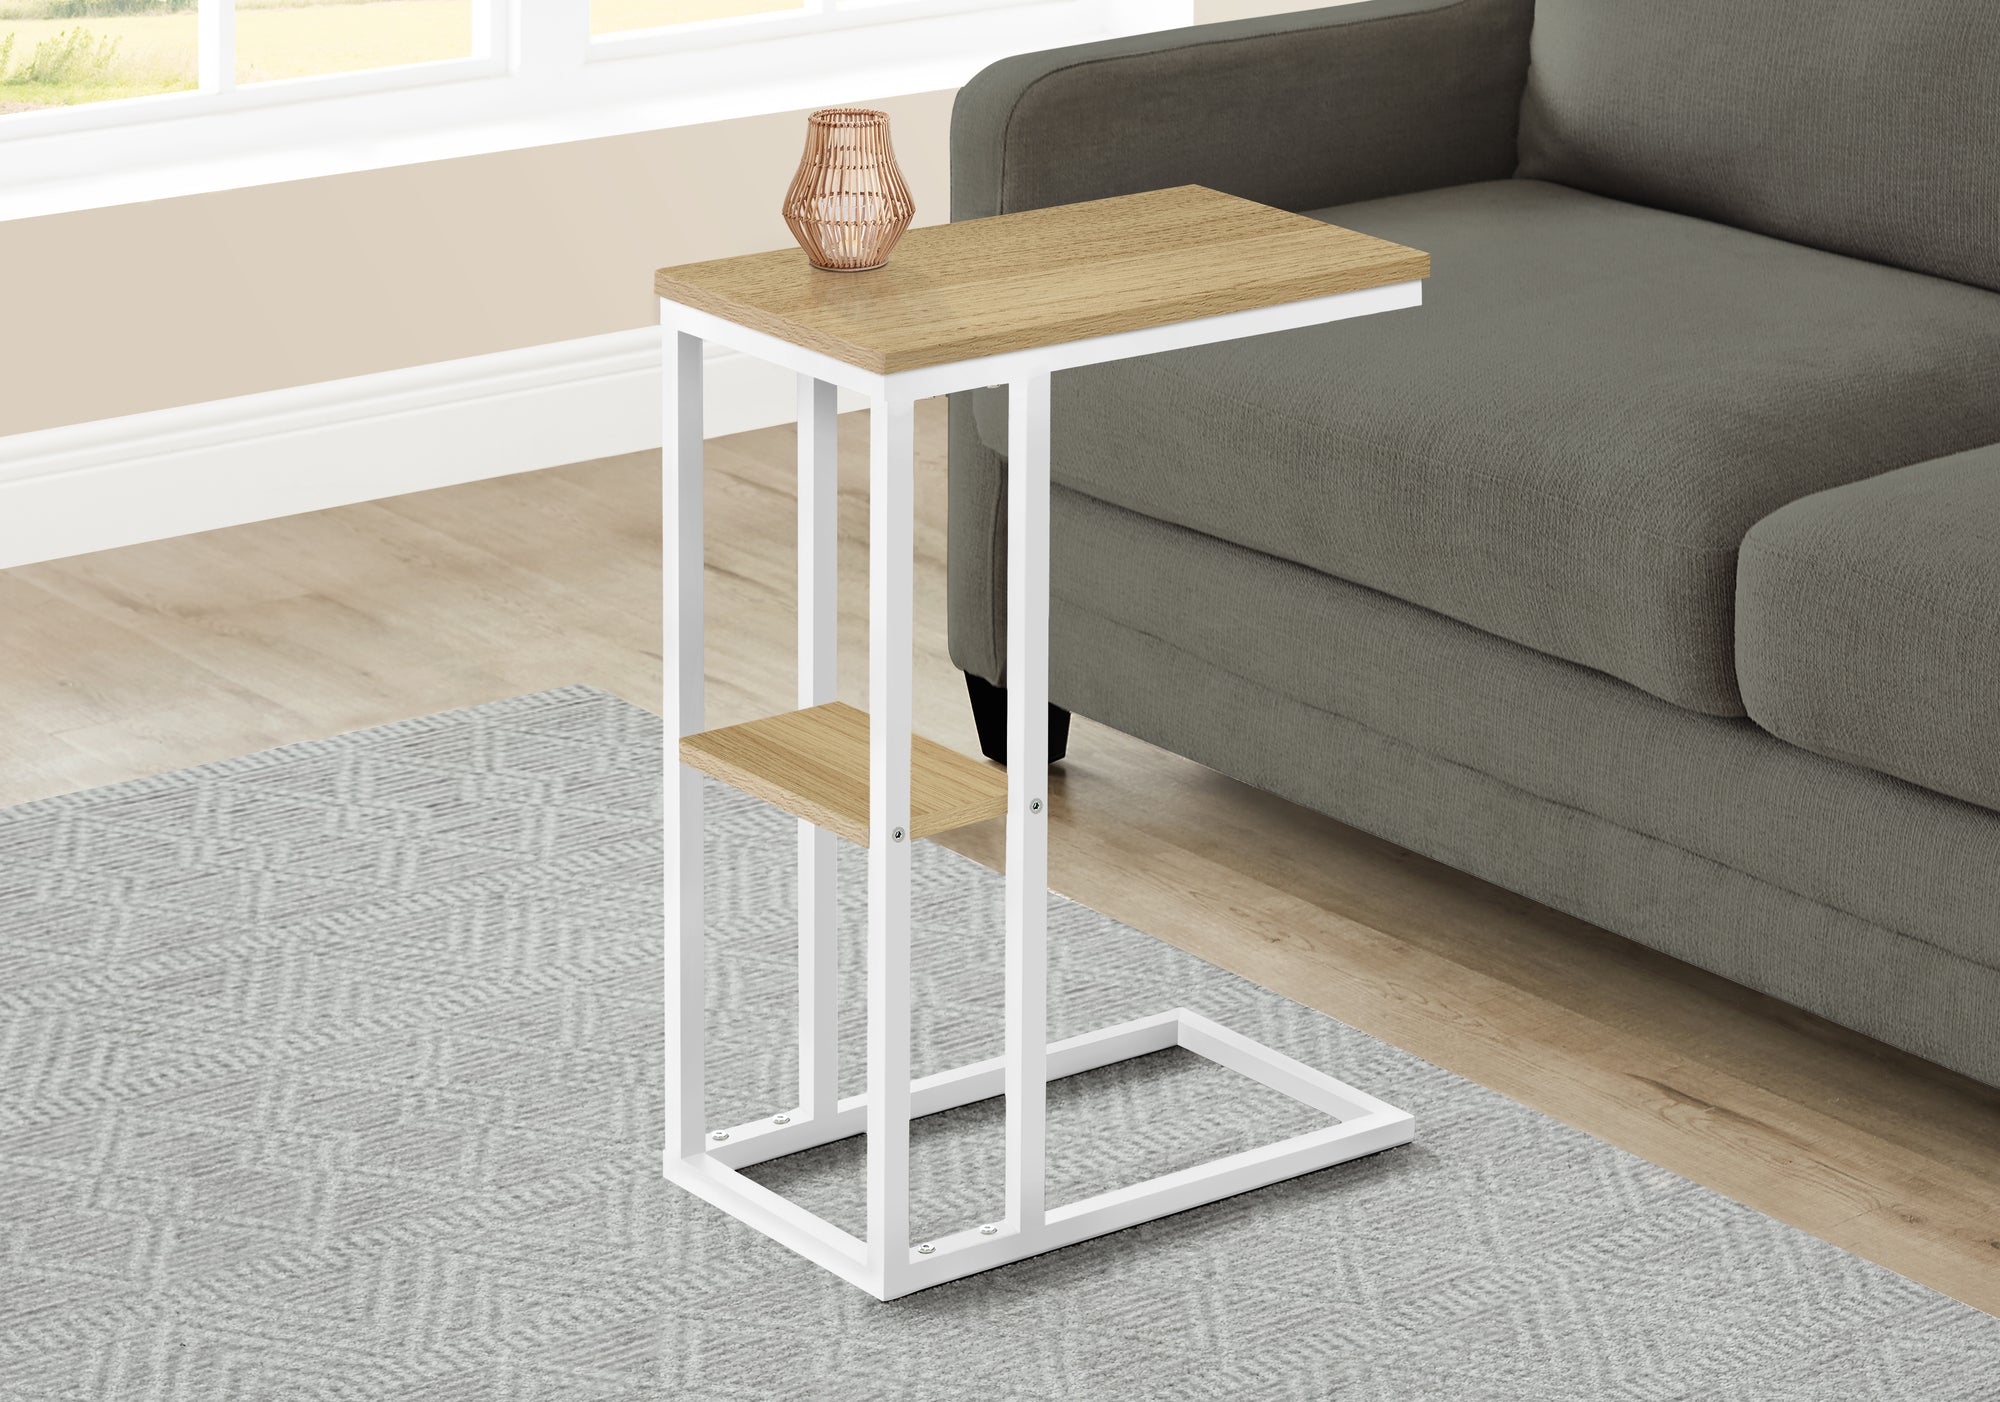 MN-233677    Accent Table, C-Shaped, End, Side, Snack, Living Room, Bedroom, Metal Legs, Laminate, Natural, White, Contemporary, Modern